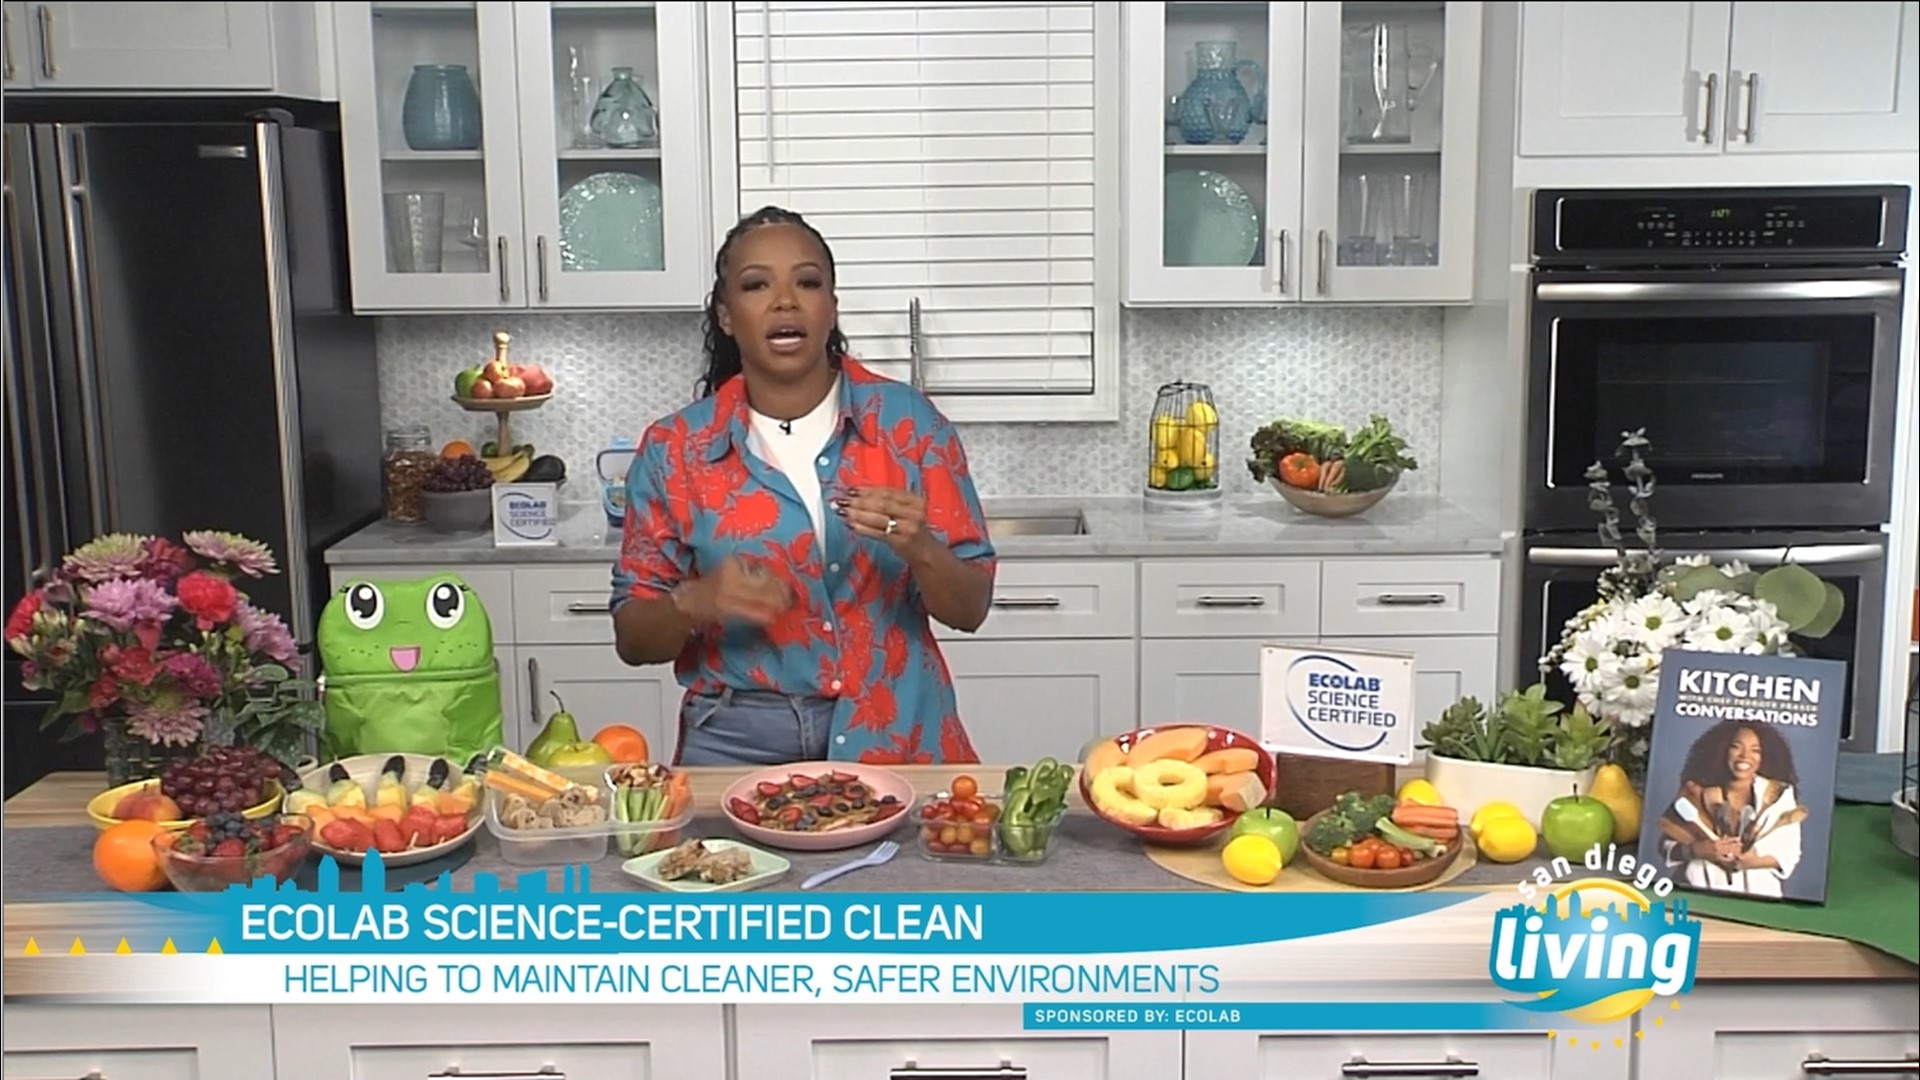 Steps to Ensure a Higher Level of Clean with Ecolab. Sponsored by Ecolab